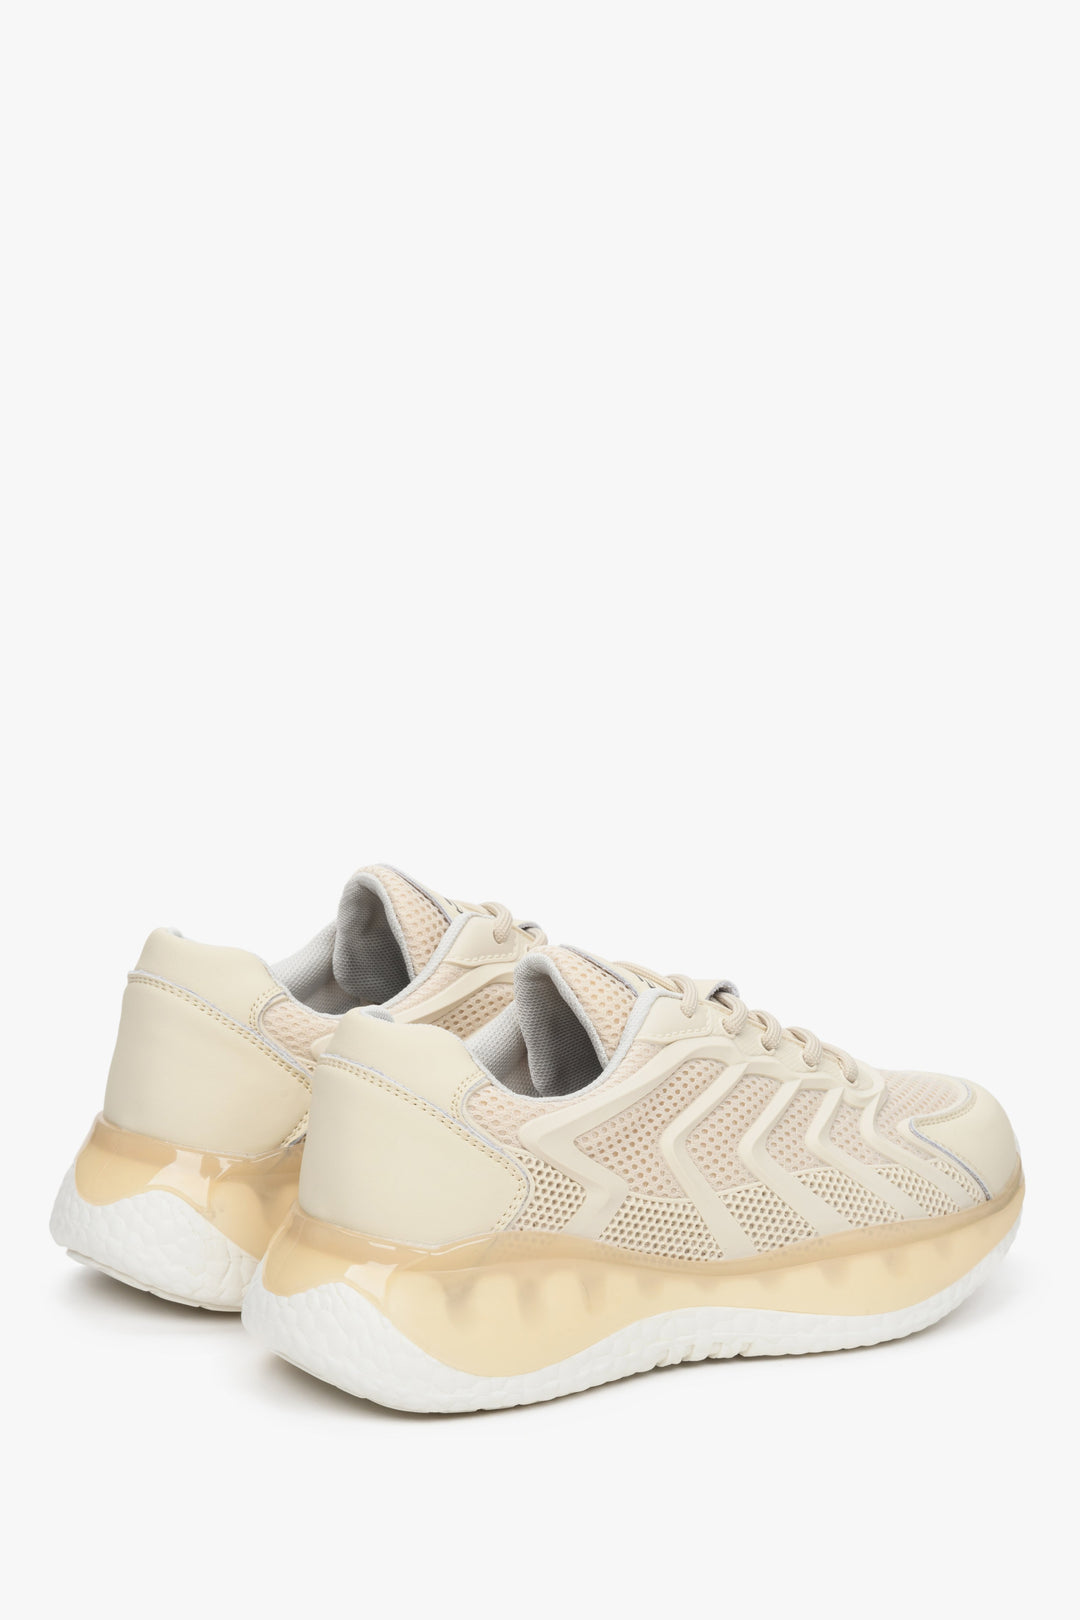 Women's beige sneakers with a chunky white sole by ES 8.